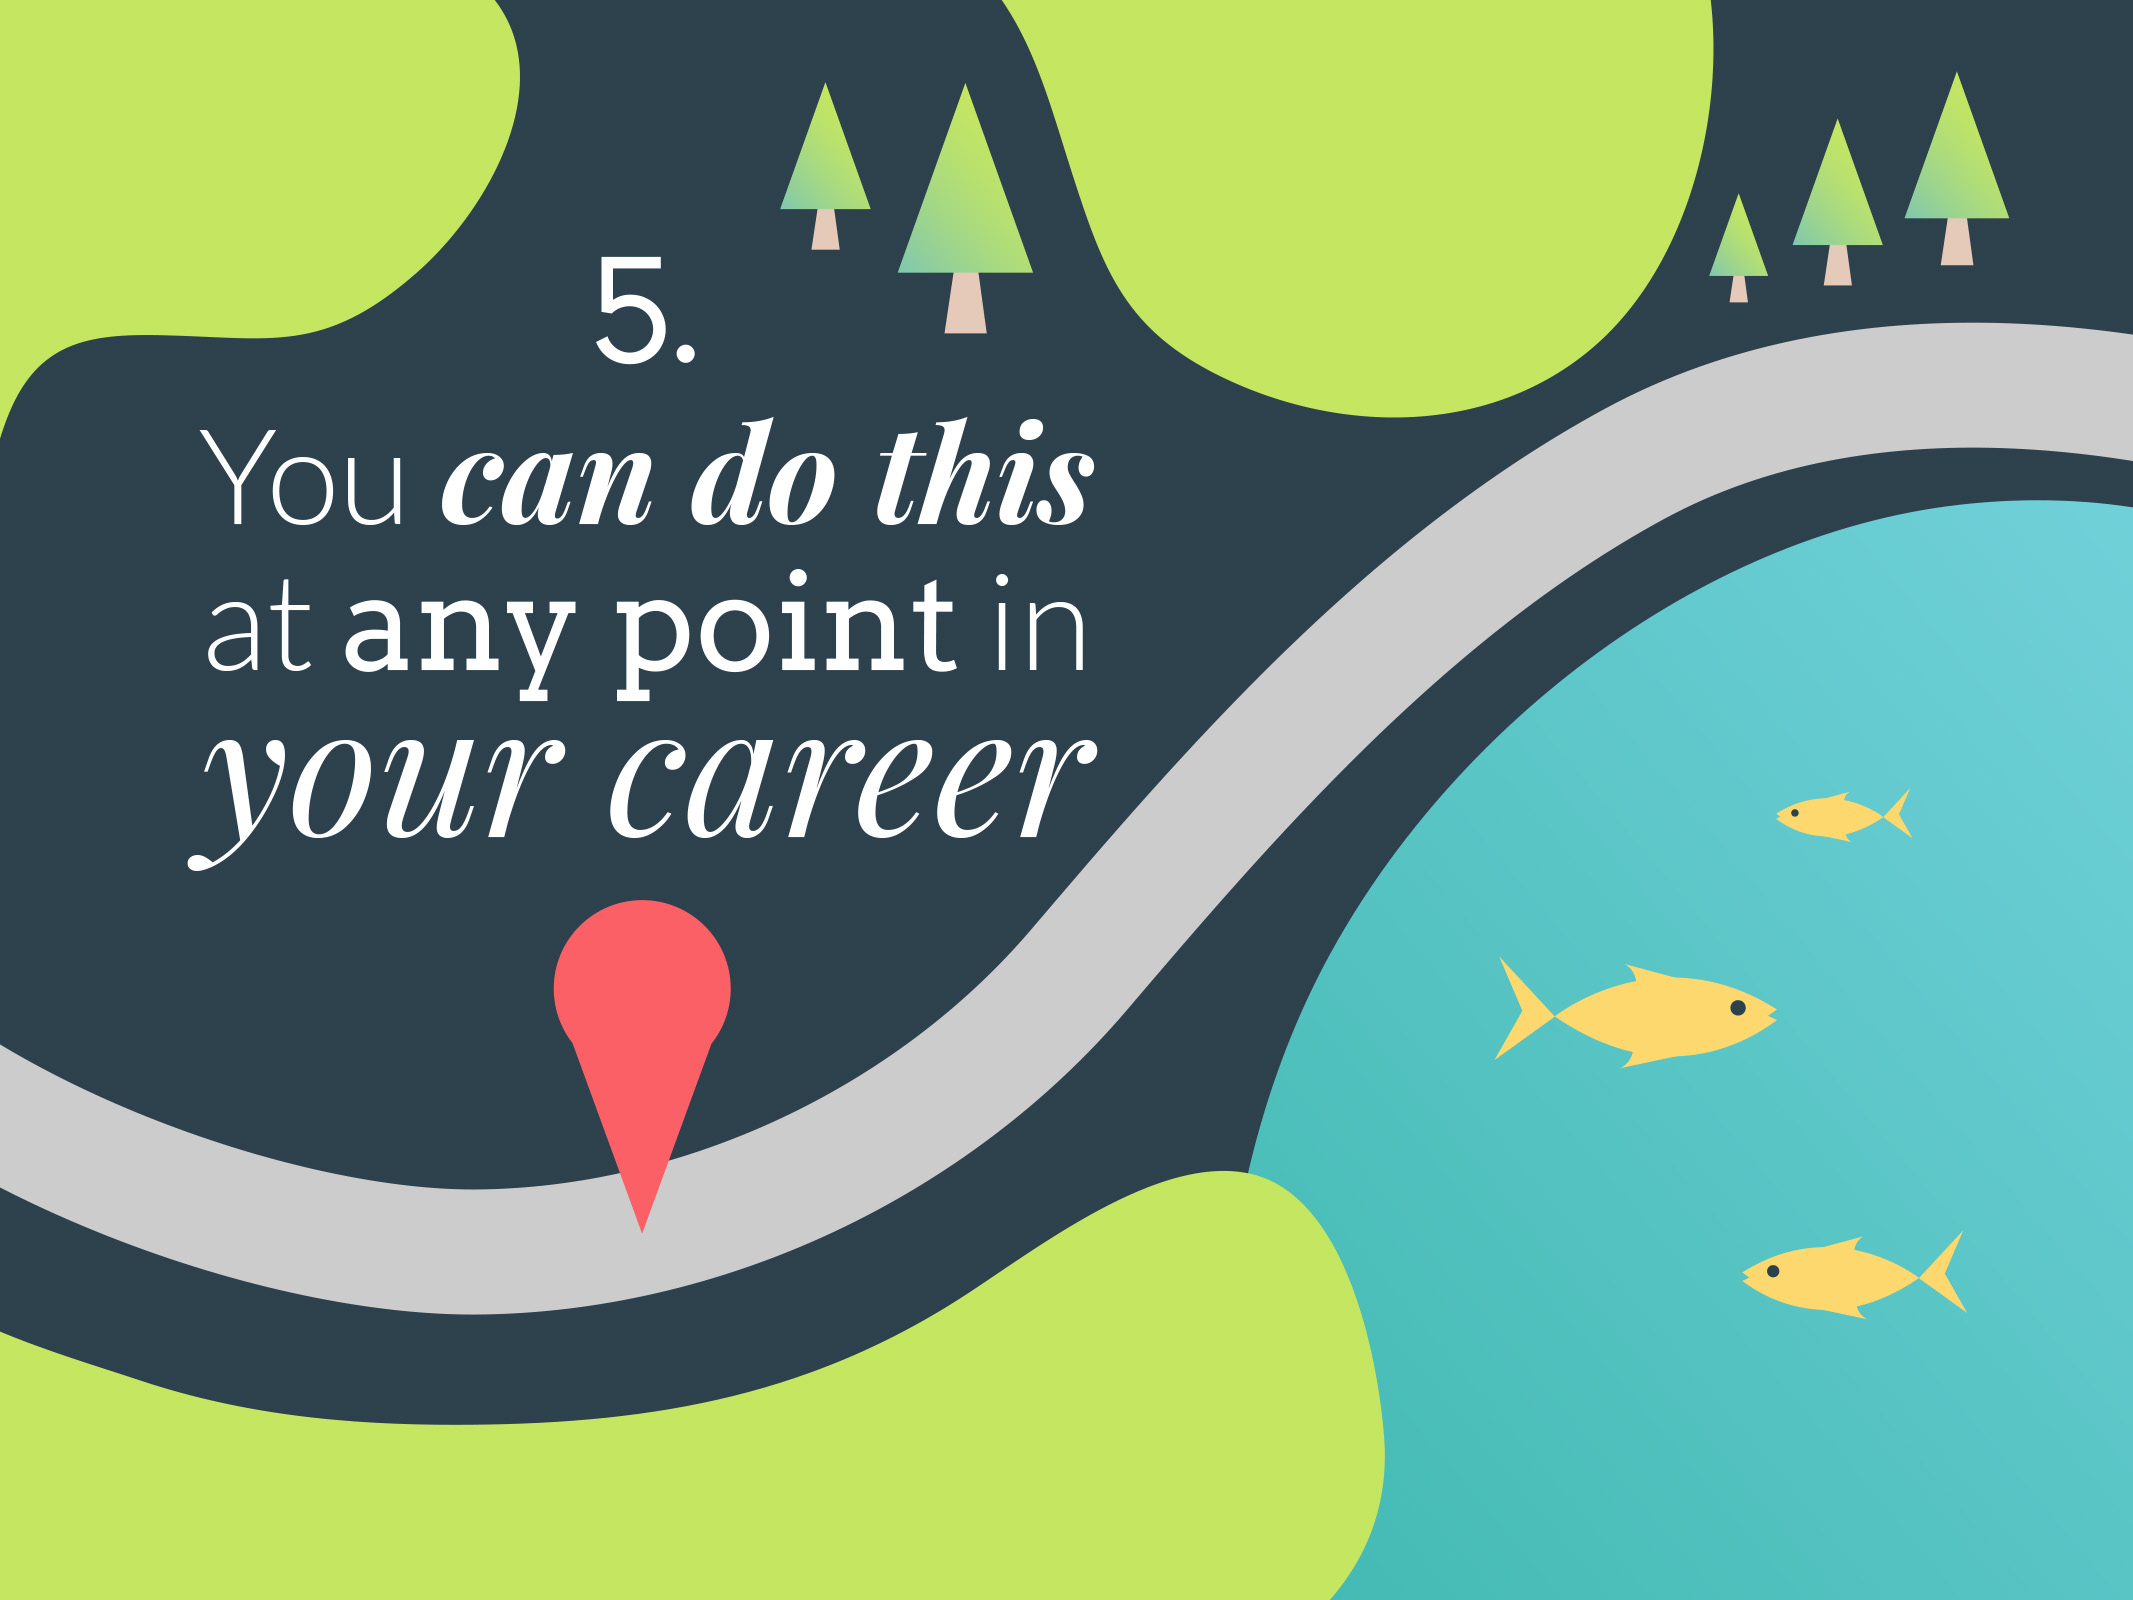 Vector illustration features a green forest landscape with a grey winding path in a map-like style. On the right, there is a blue lake with yellow fish in it. The image includes the words '5. You can do this at any point in your career' in white text. 